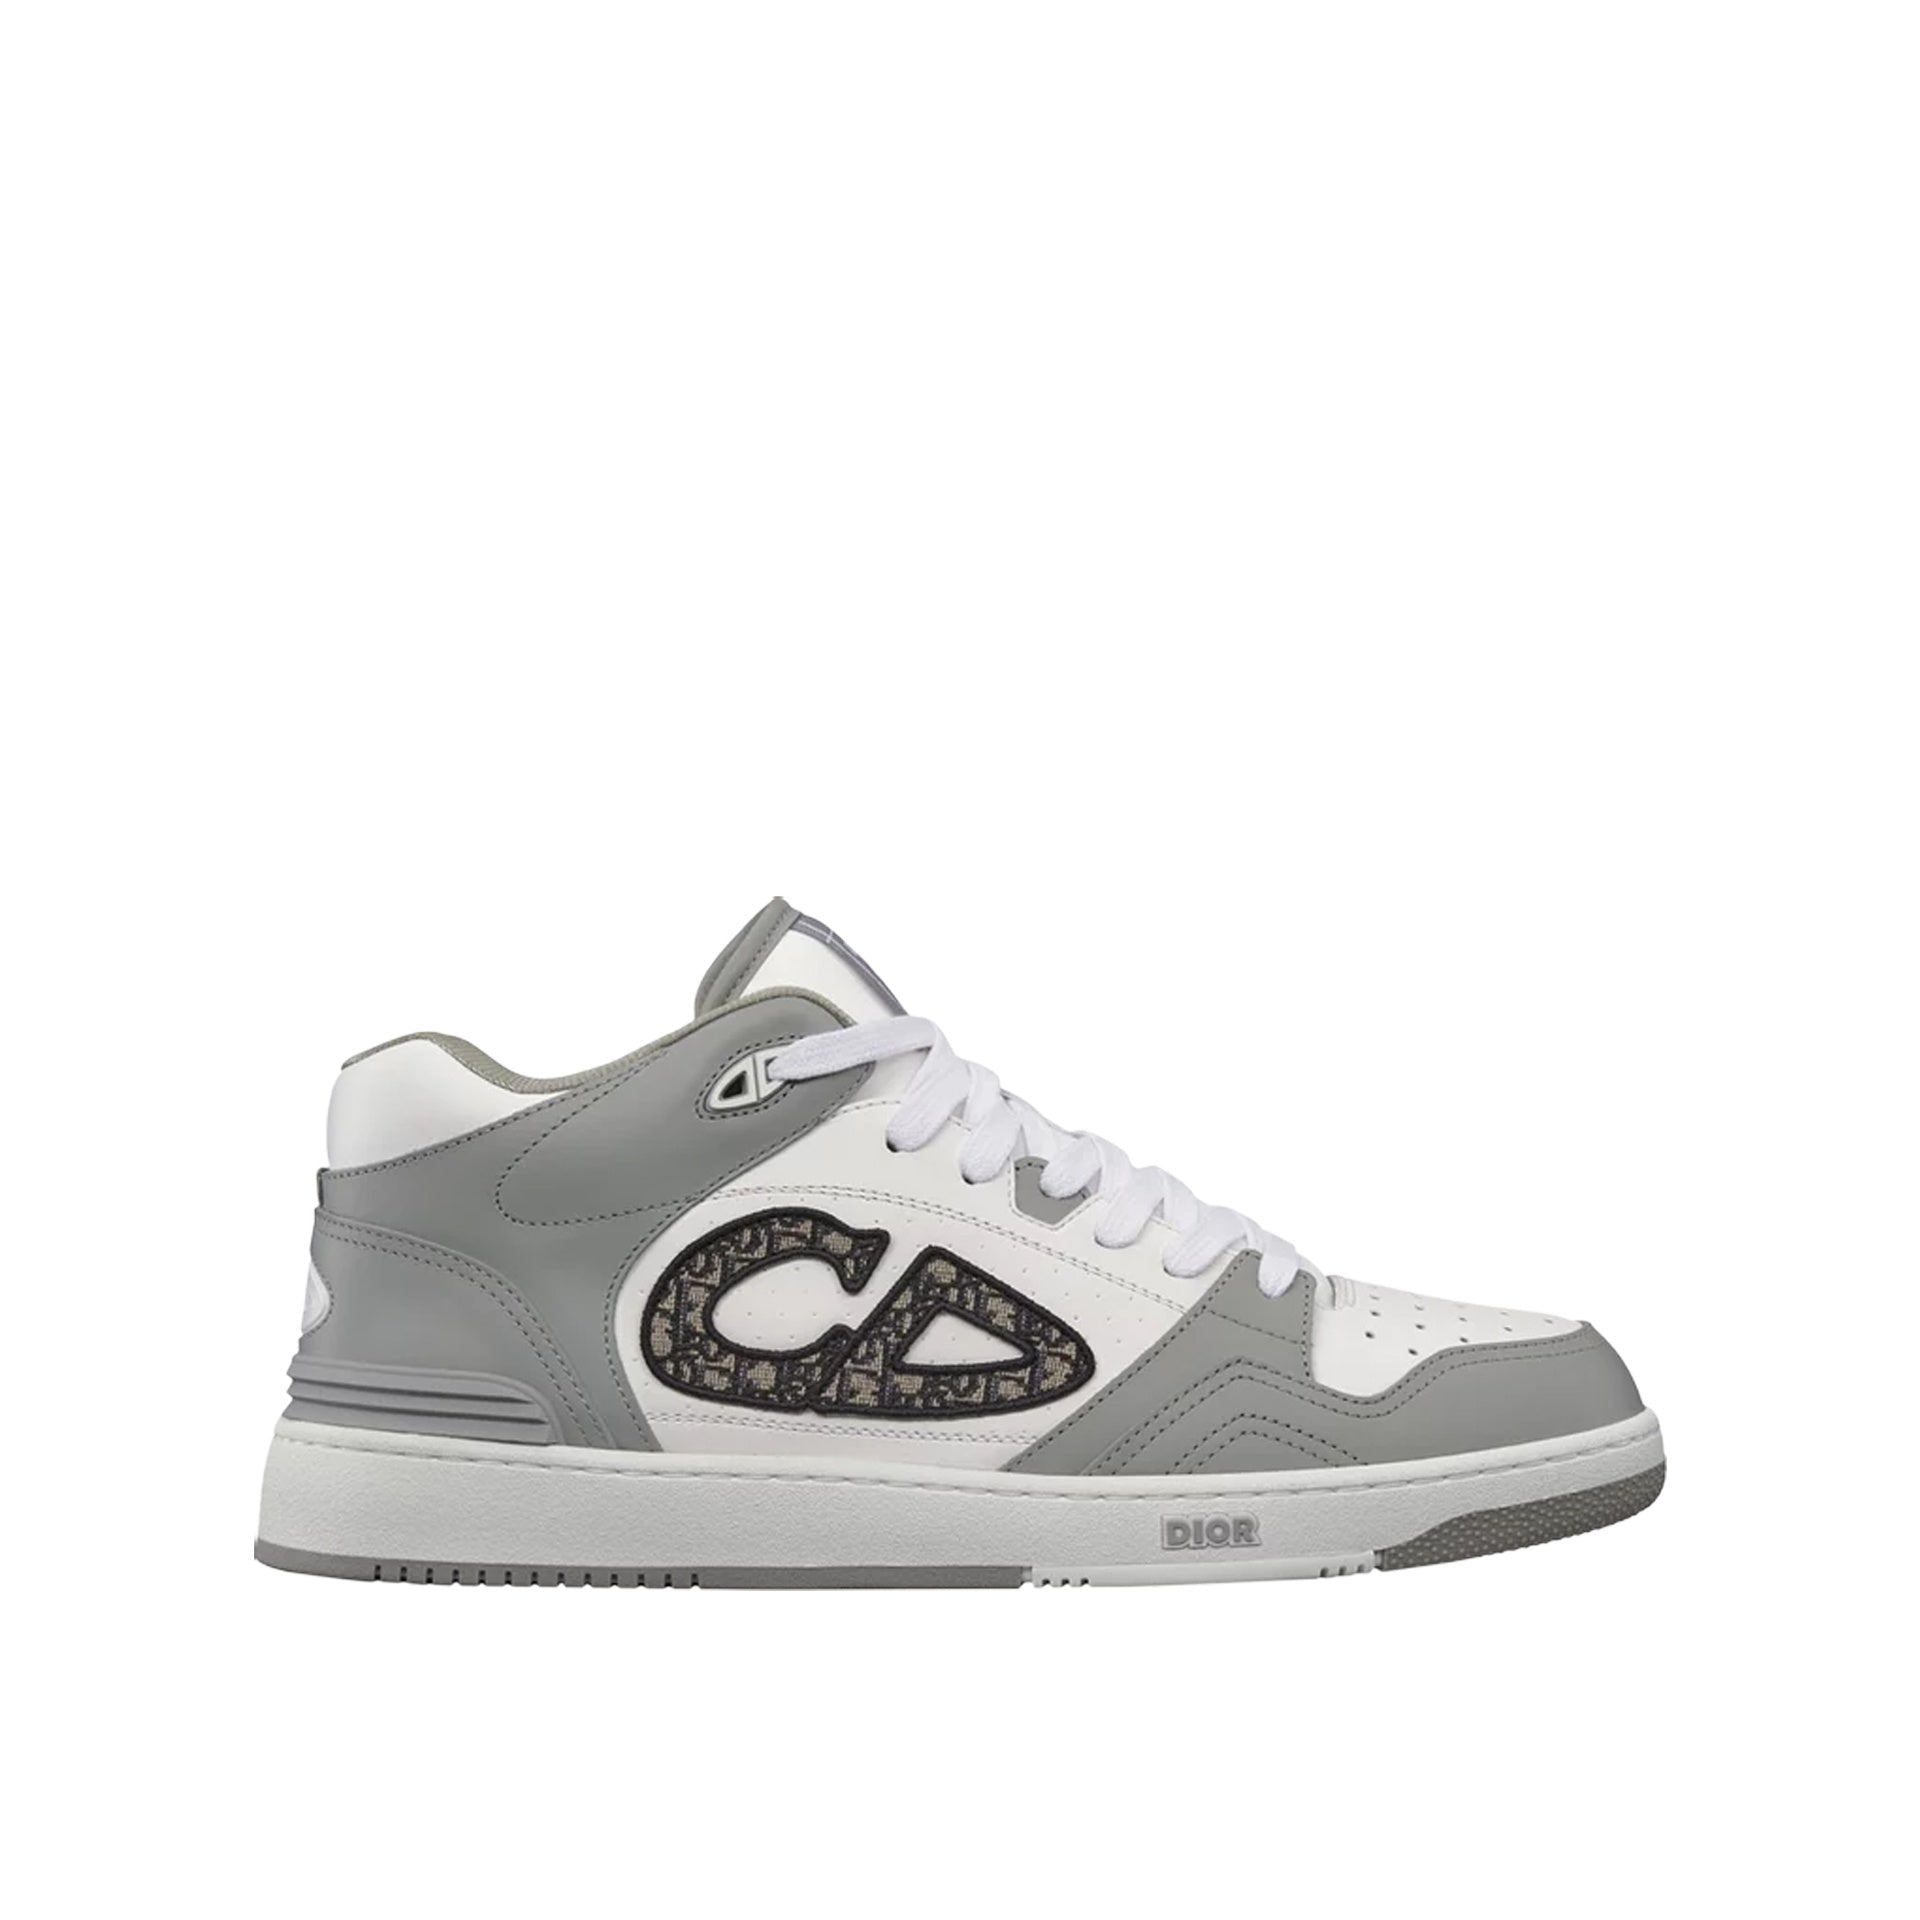 Dior B57 Mid Leather Sneakers In Gray